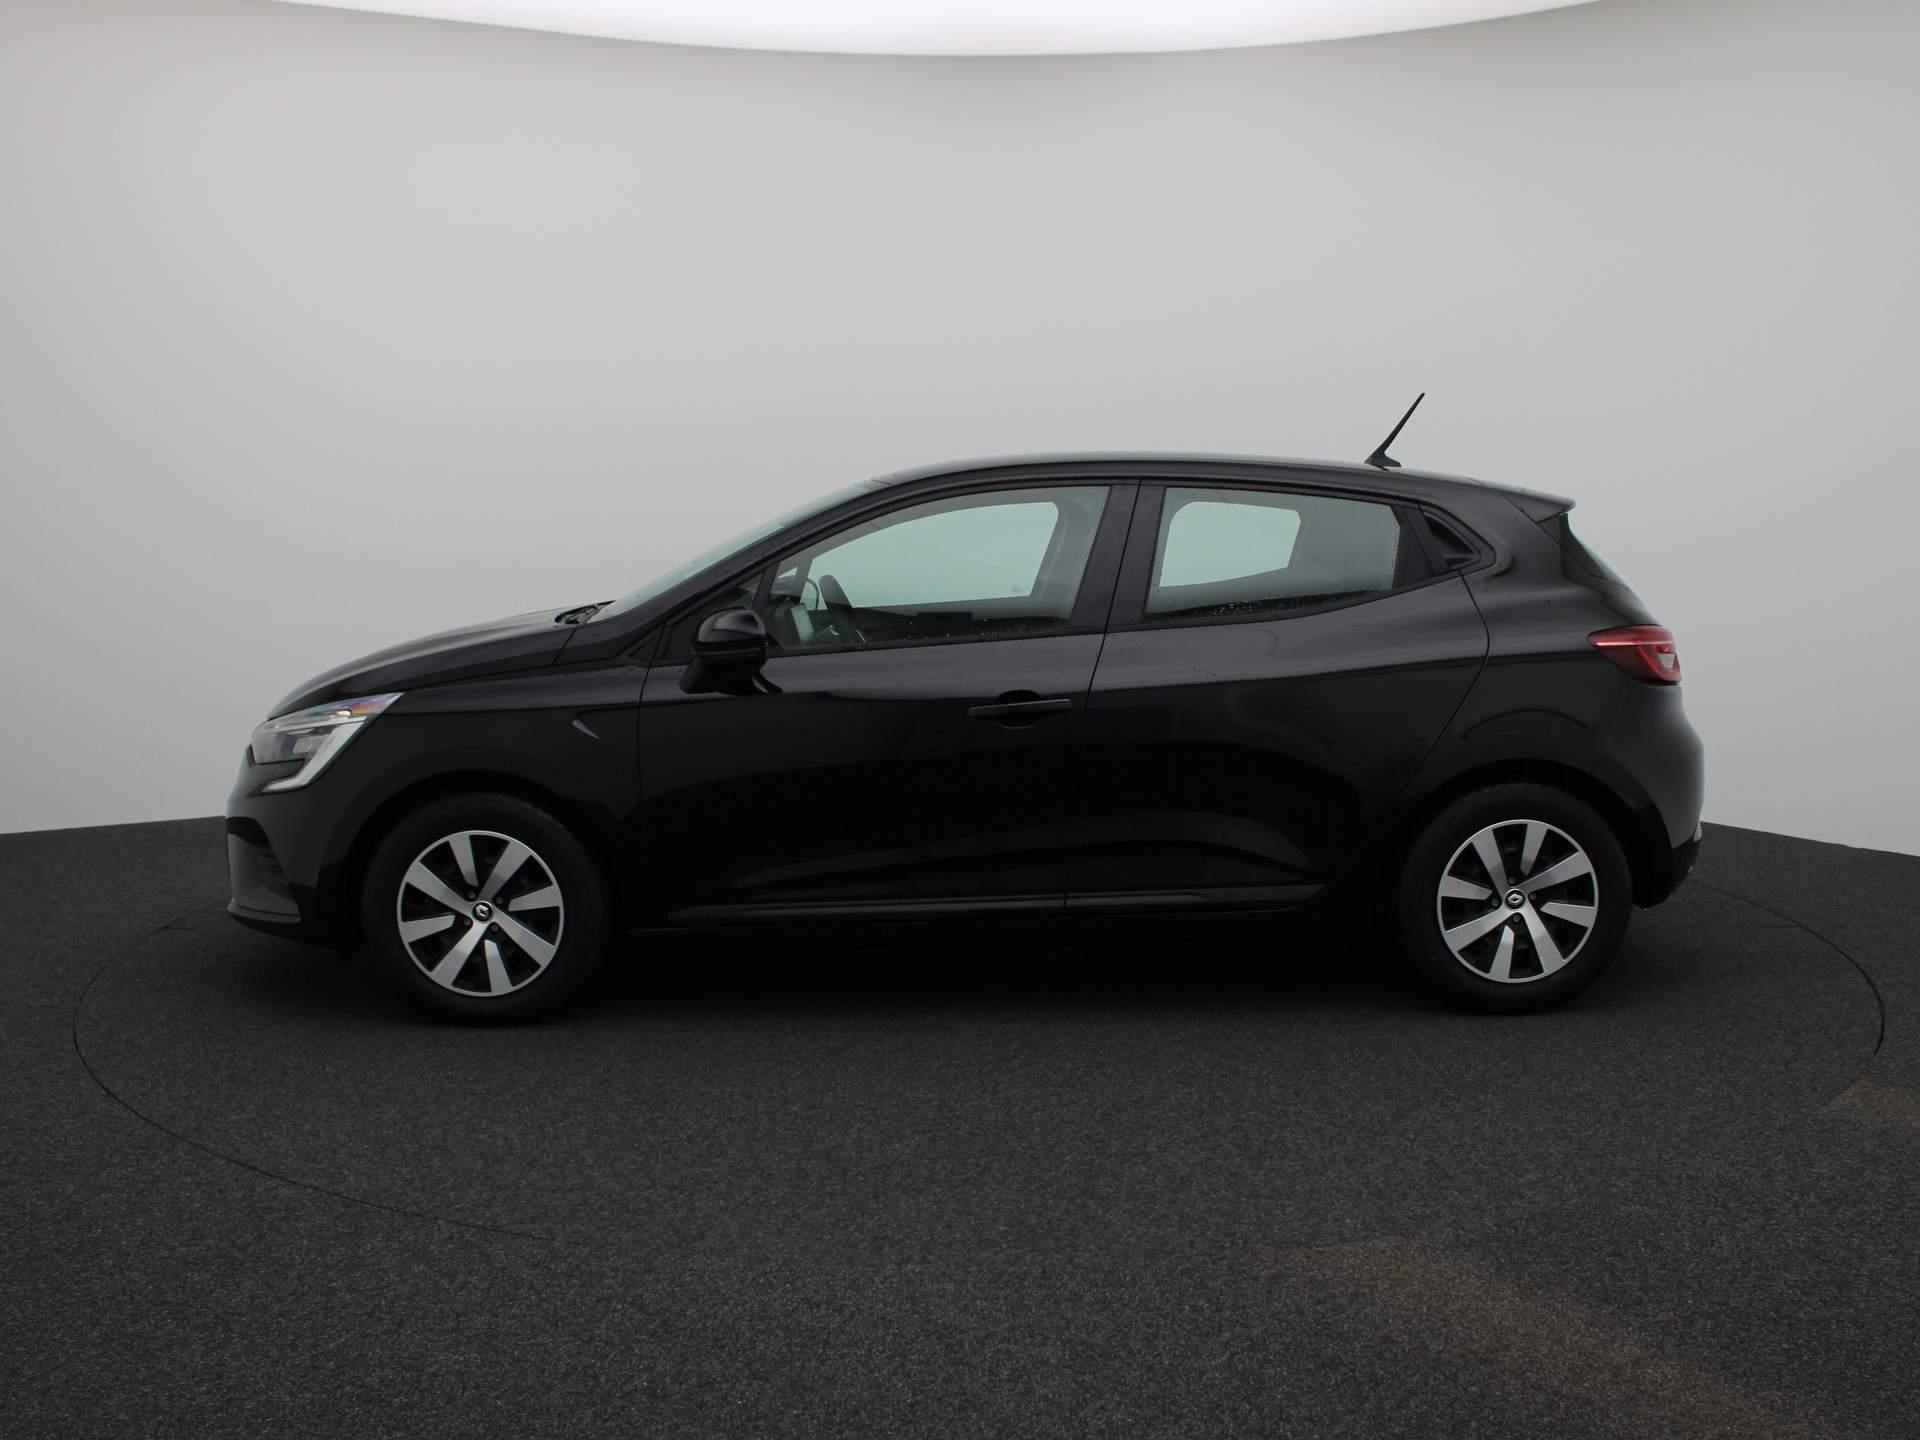 Renault Clio 1.6 E-Tech Full Hybrid 145 Equilibre | PDC Achter | Airconditioning | Draadloze Apple Carplay & Android Auto | Cruise Control | Licht- en regensensor - 4/36